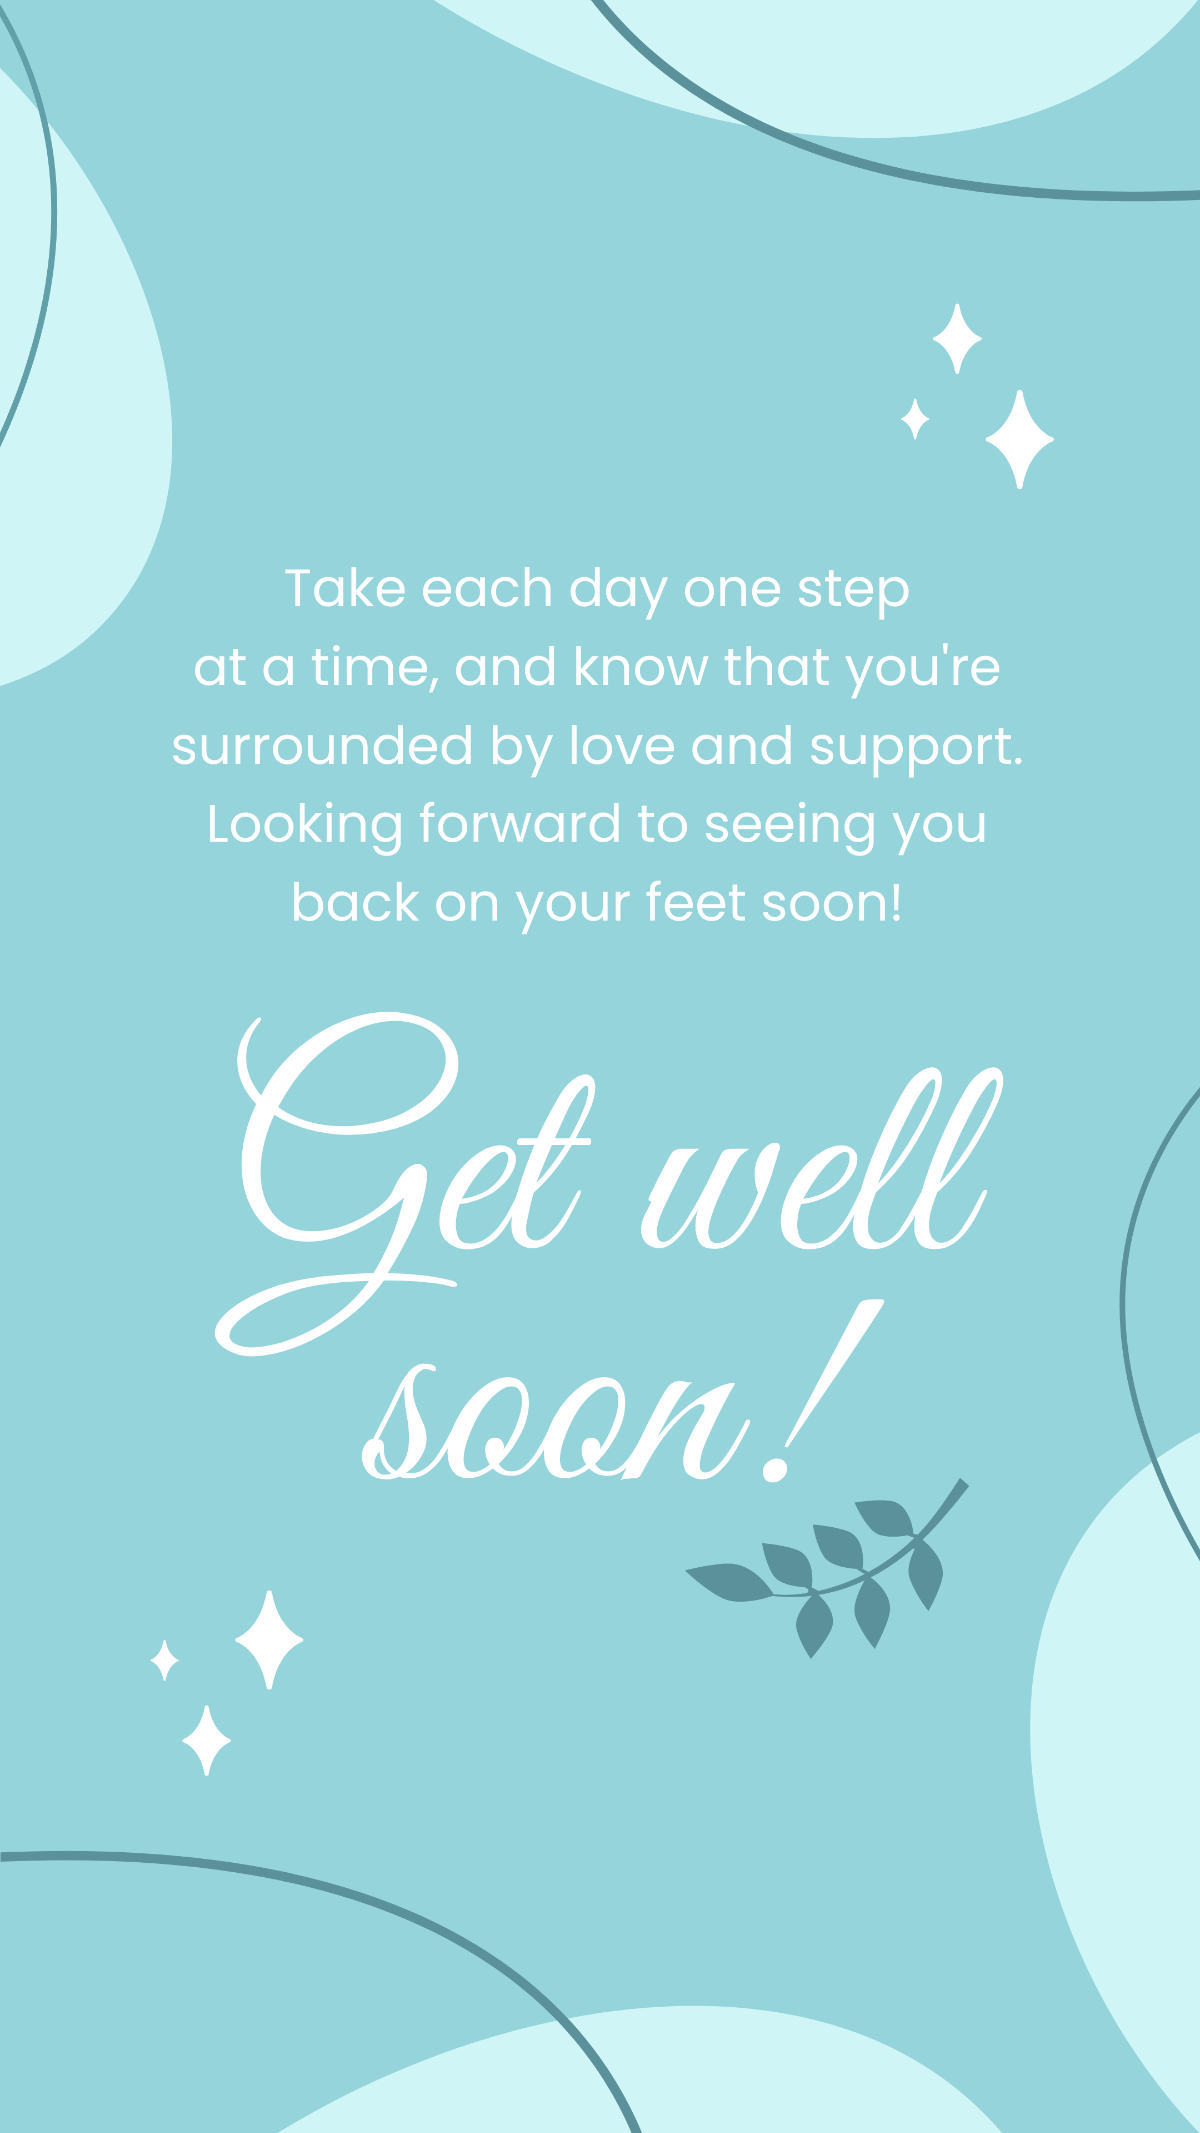 Get Well Soon Message For Patient